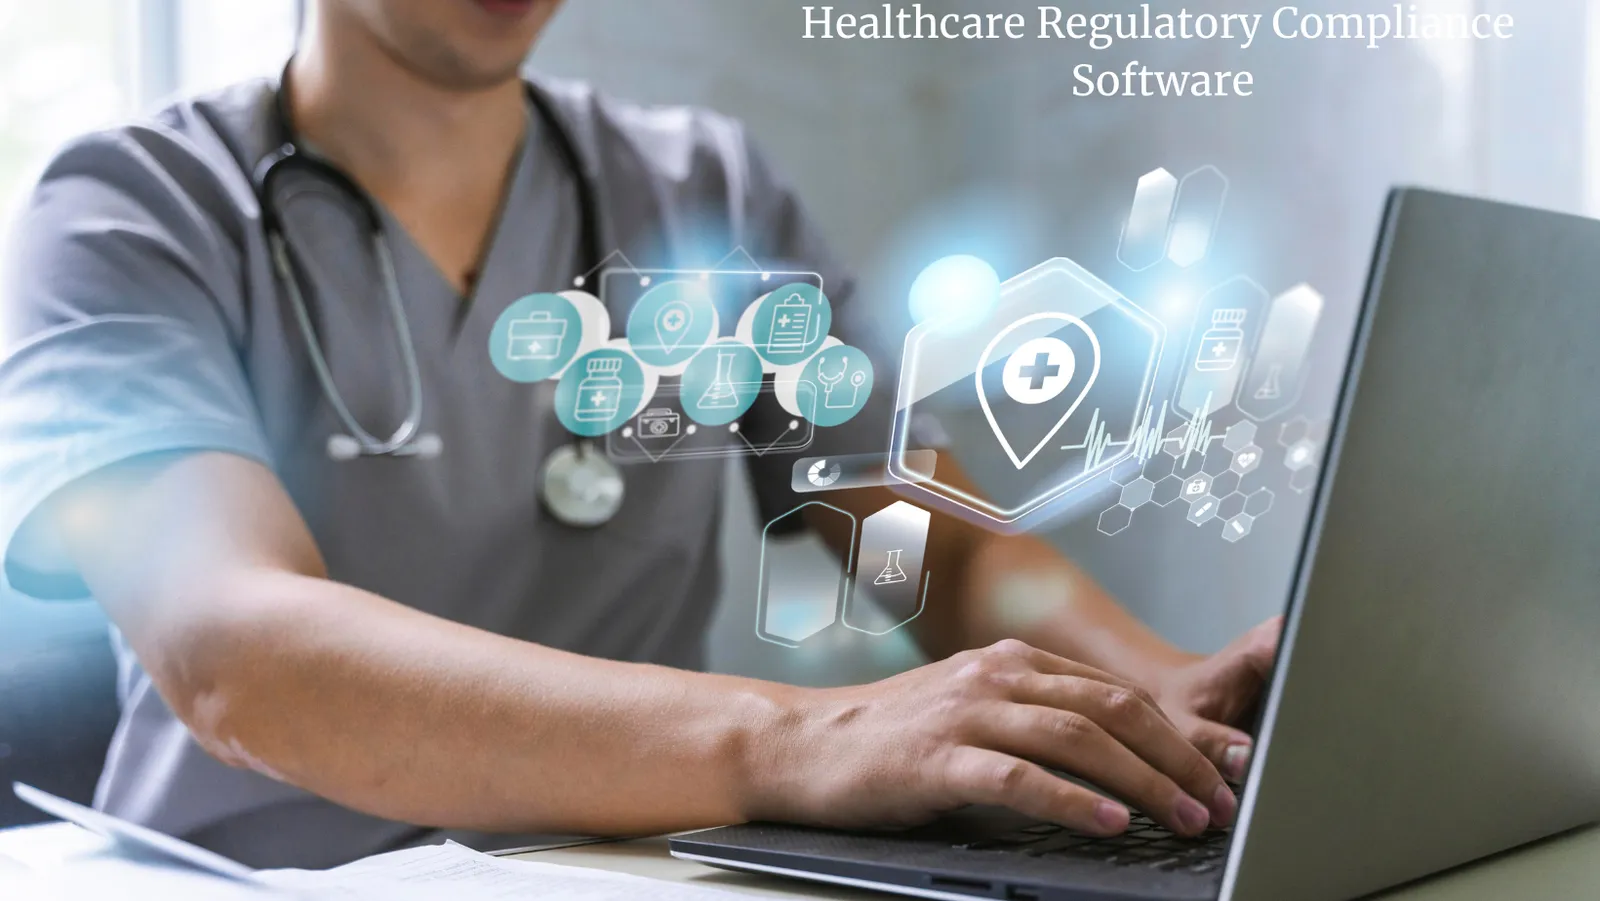 Benefits and Challenges in Healthcare Regulatory Compliance Software